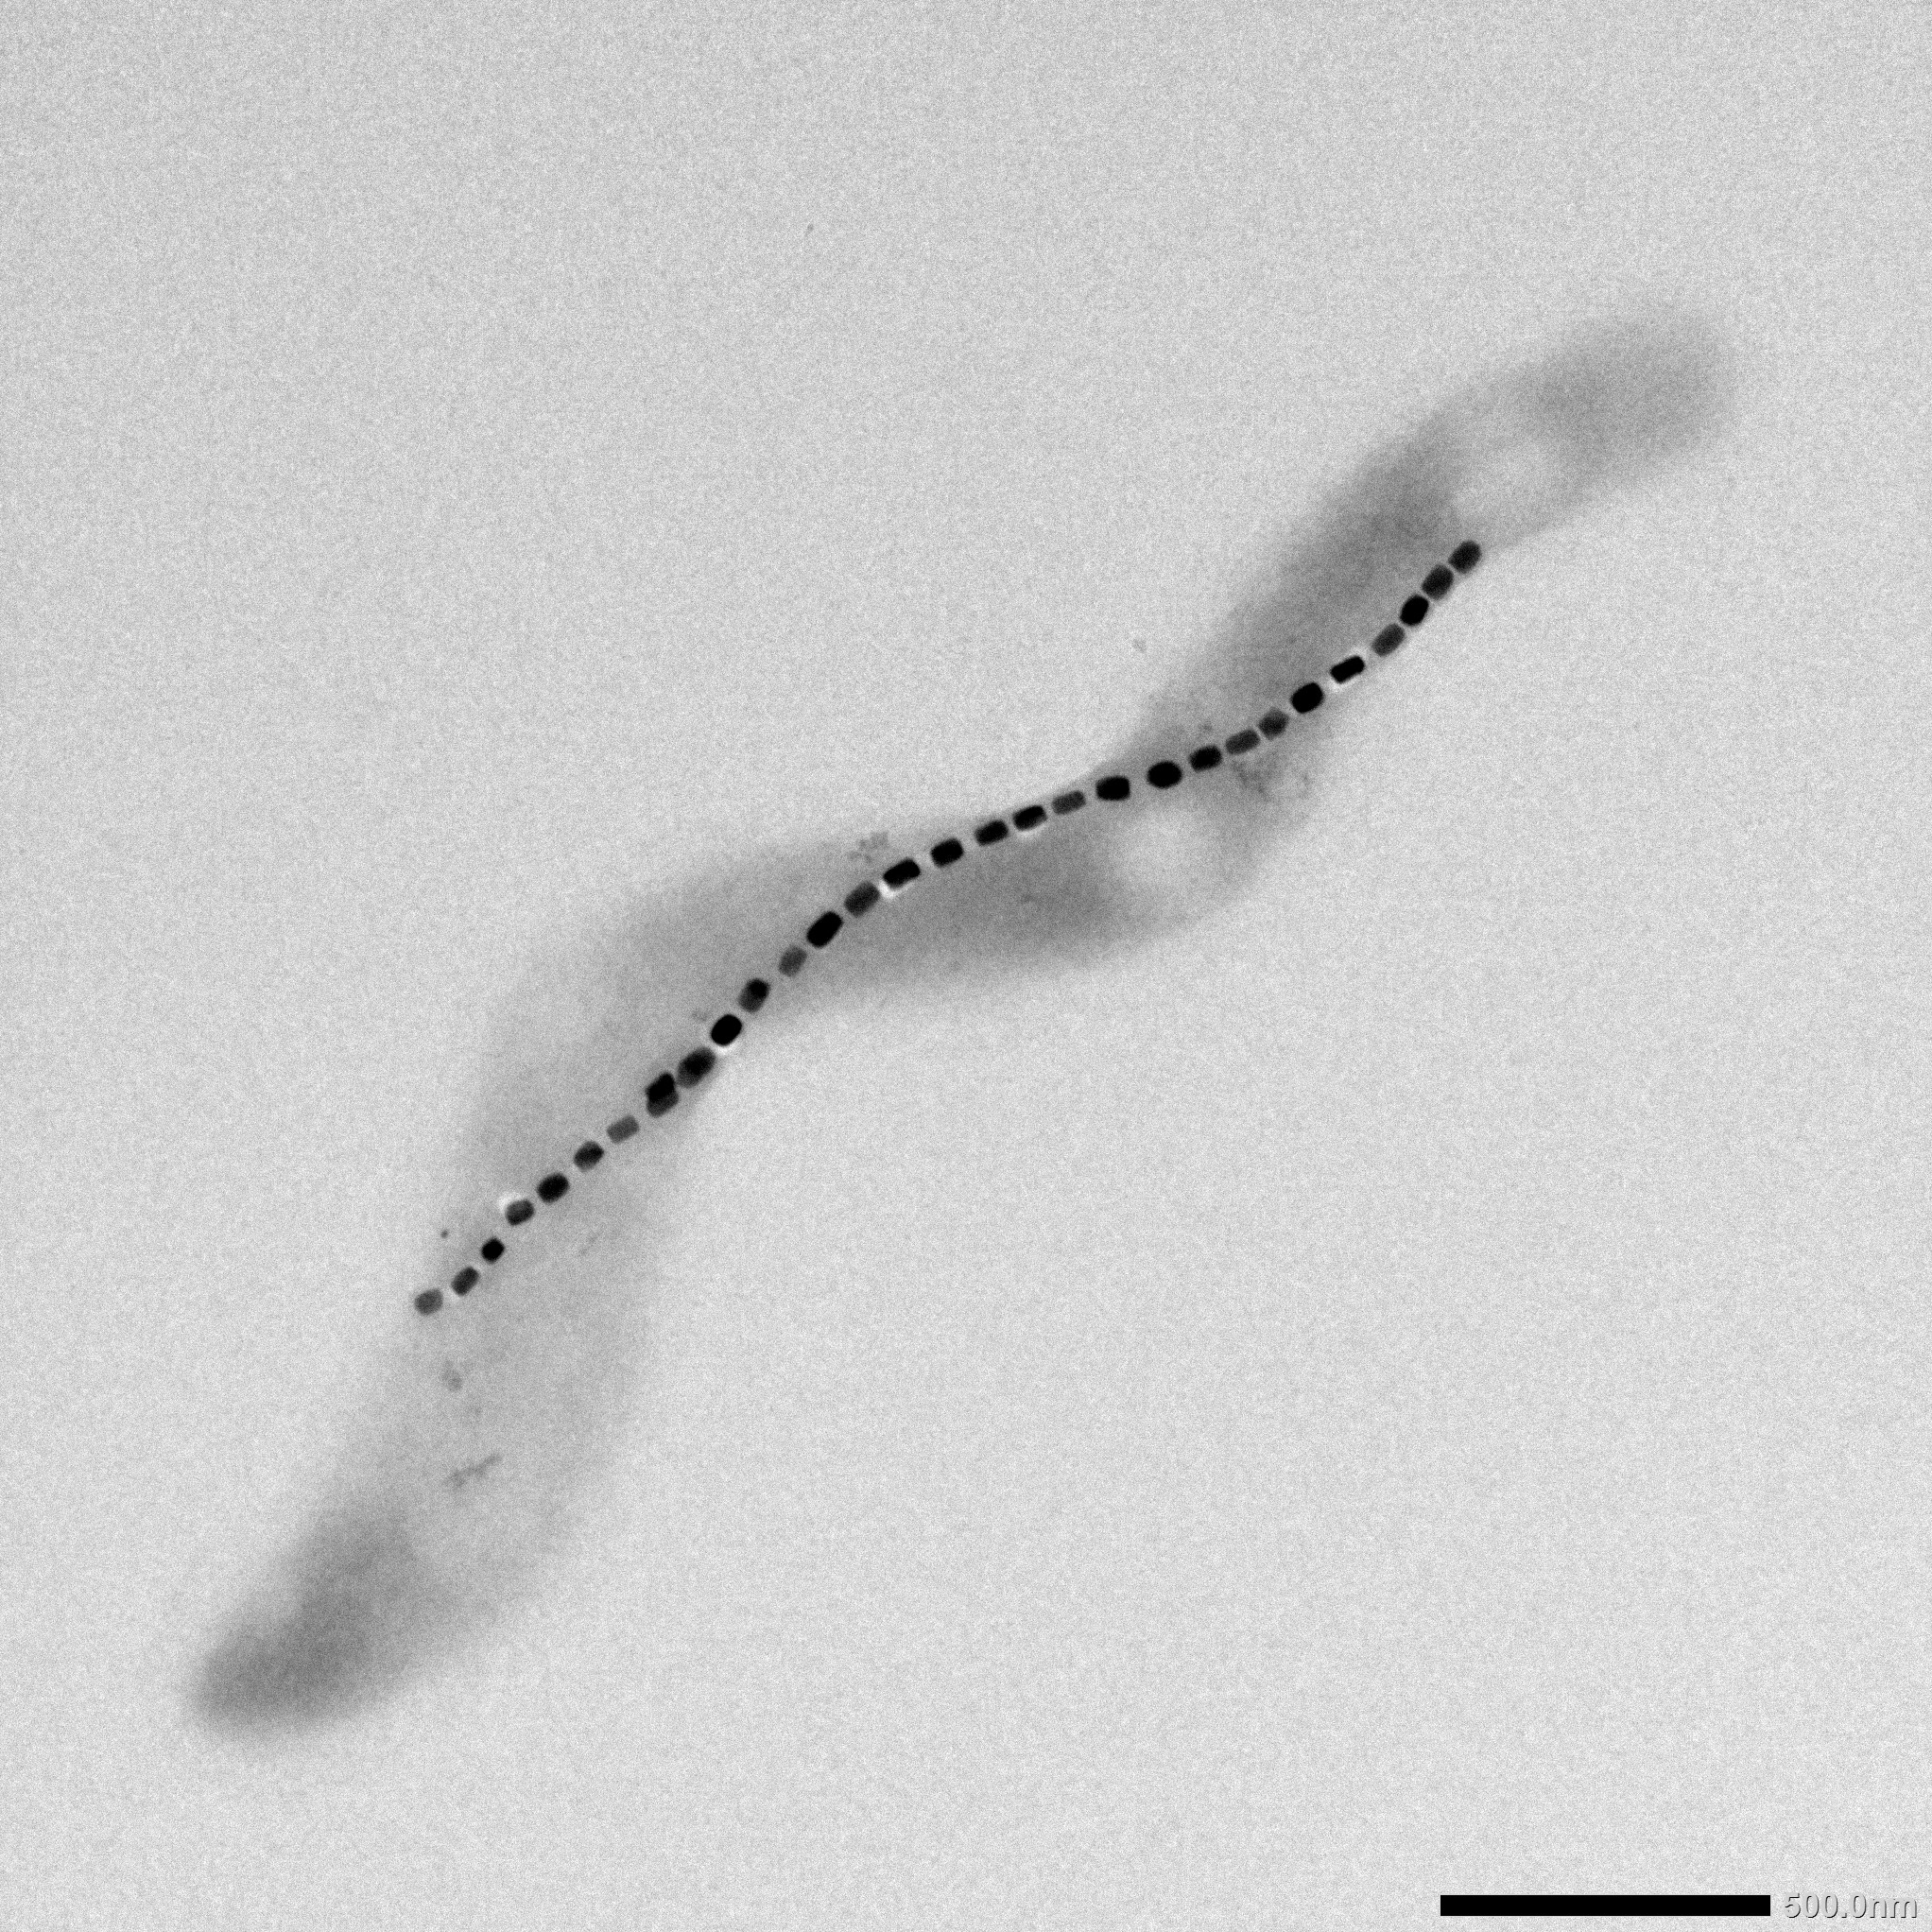 Image of a magnetotactic bacteria